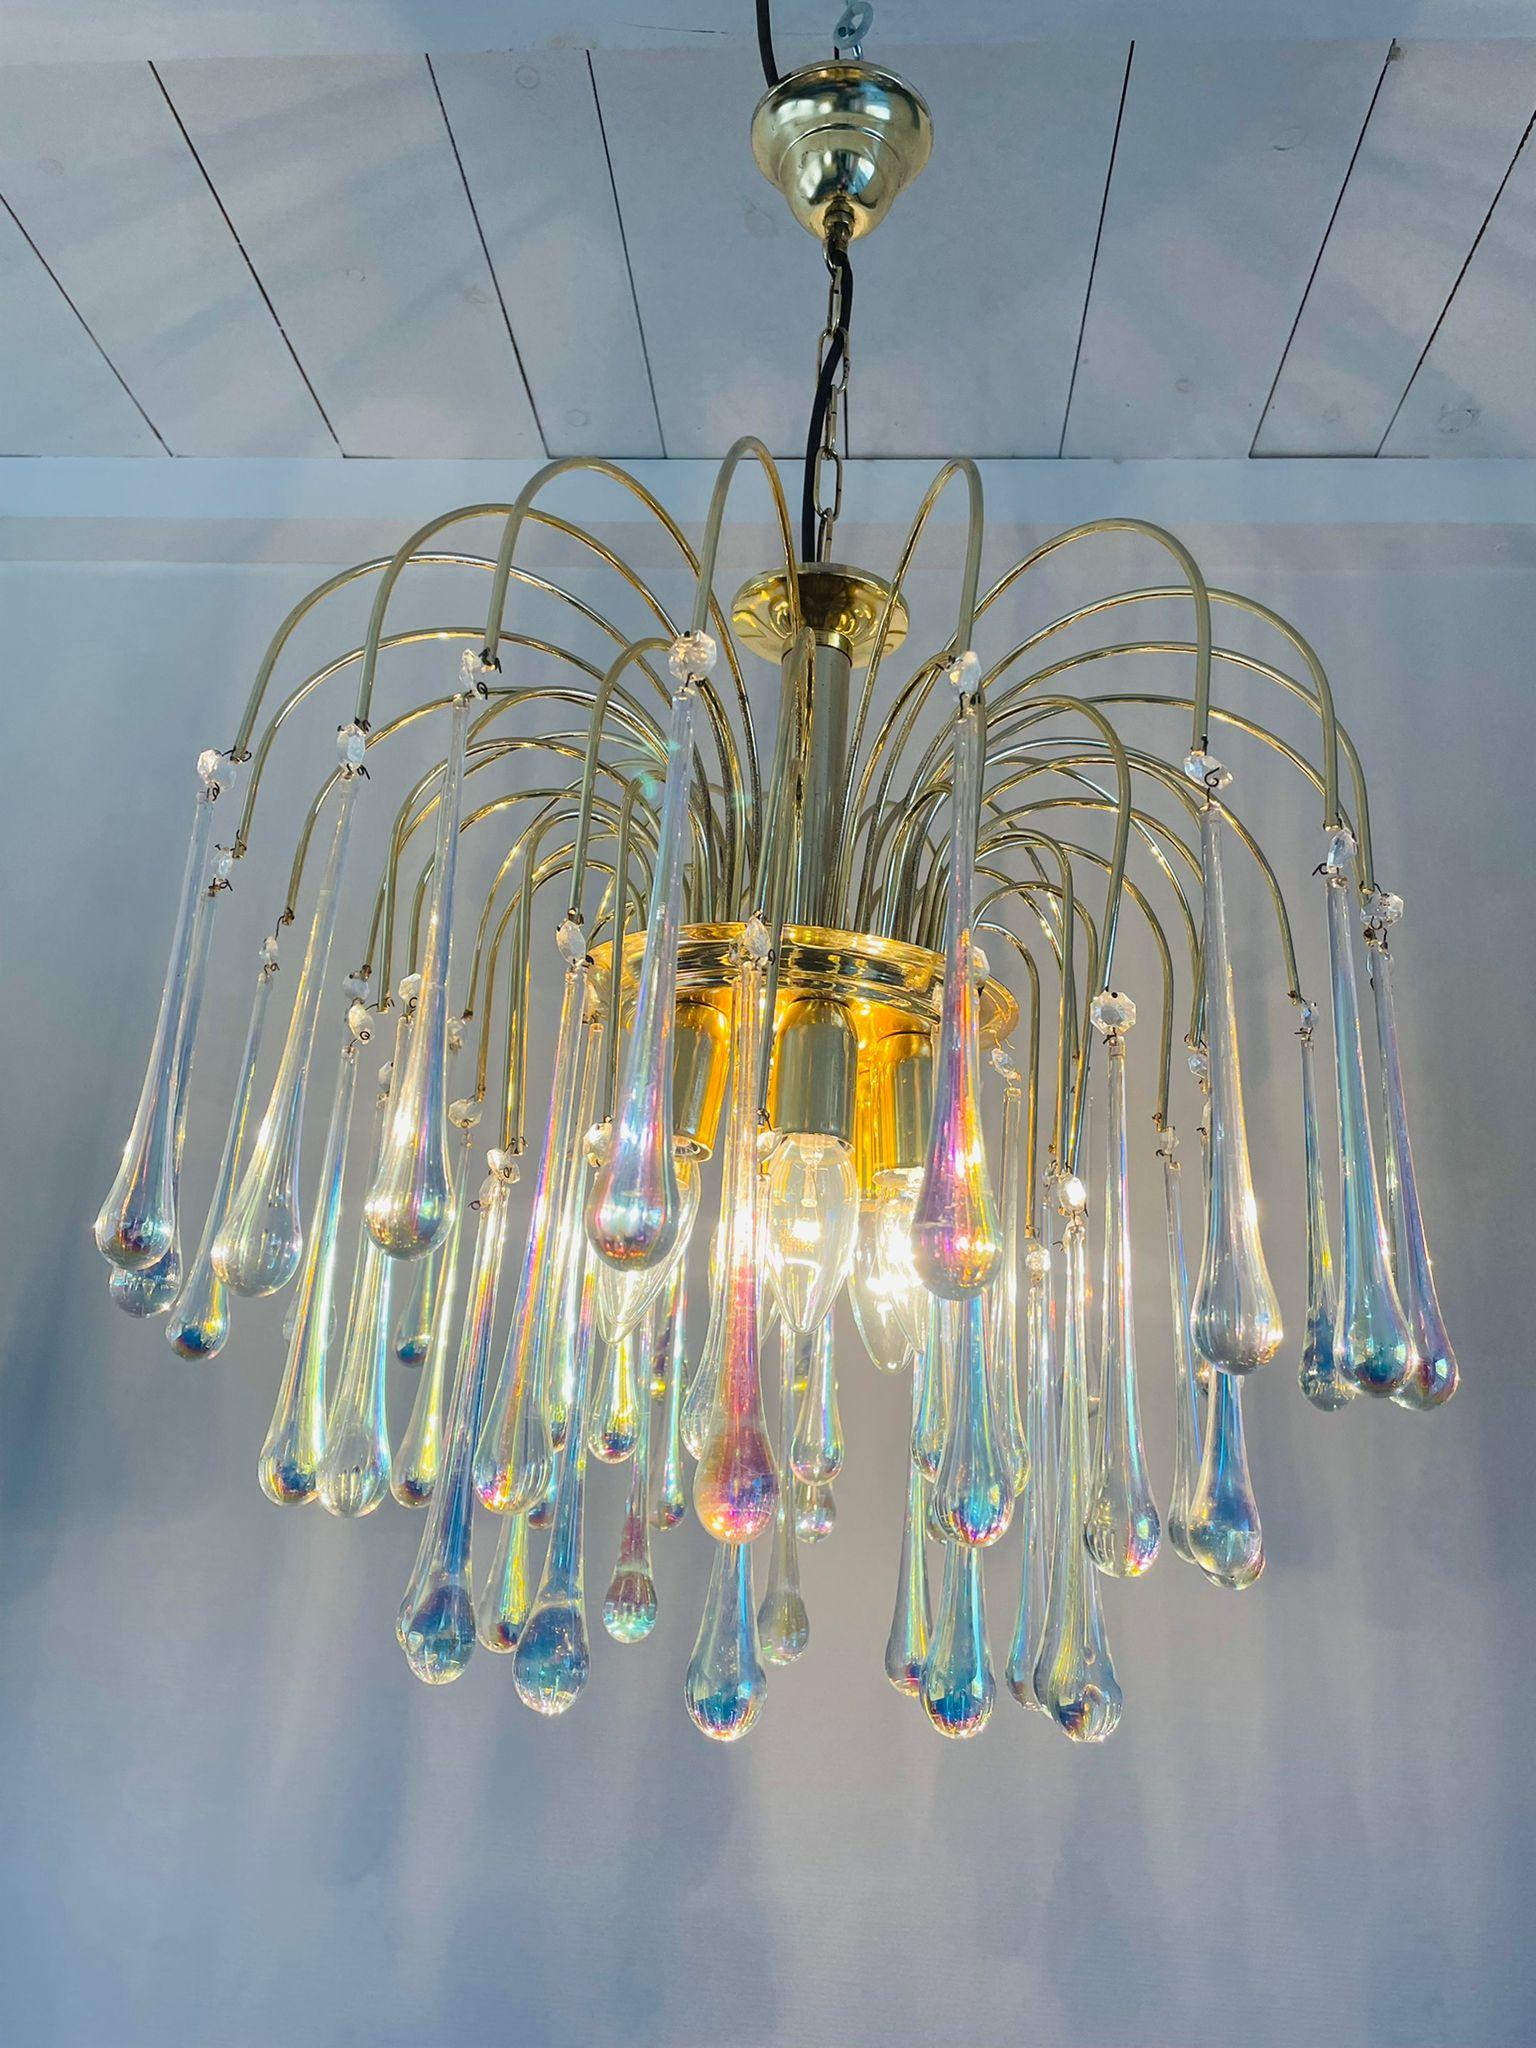 Elegant brass and murano crystal chandelier.

The lamp is decorated with handblown cystal murano teardrop glasses.

The chandelier emits a stunning light.

The lamp is fitted with 6 E27 light sockets.

1970s - Italy

Height: